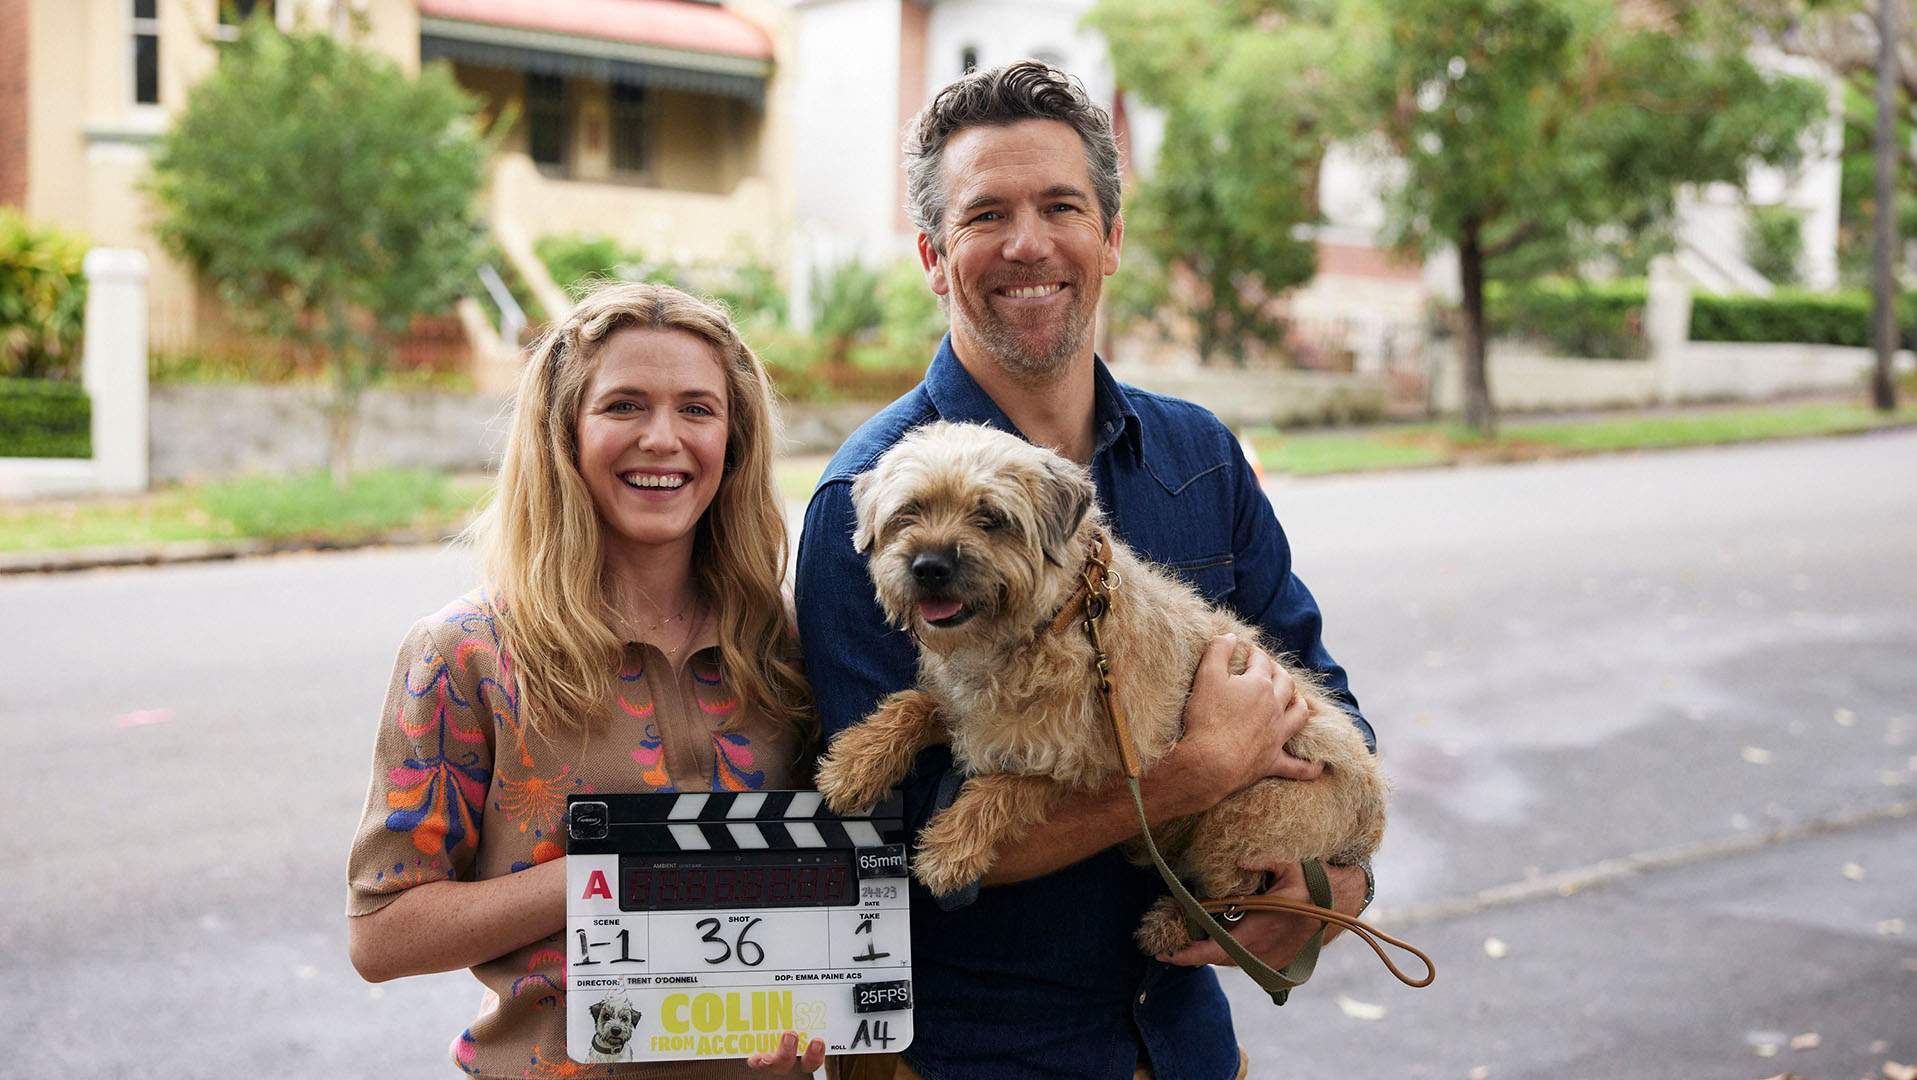 Starting a Rom-Com Sitcom with a Nipple Flash and a Dog on Wheels: Harriet Dyer and Patrick Brammall Talk 'Colin From Accounts'